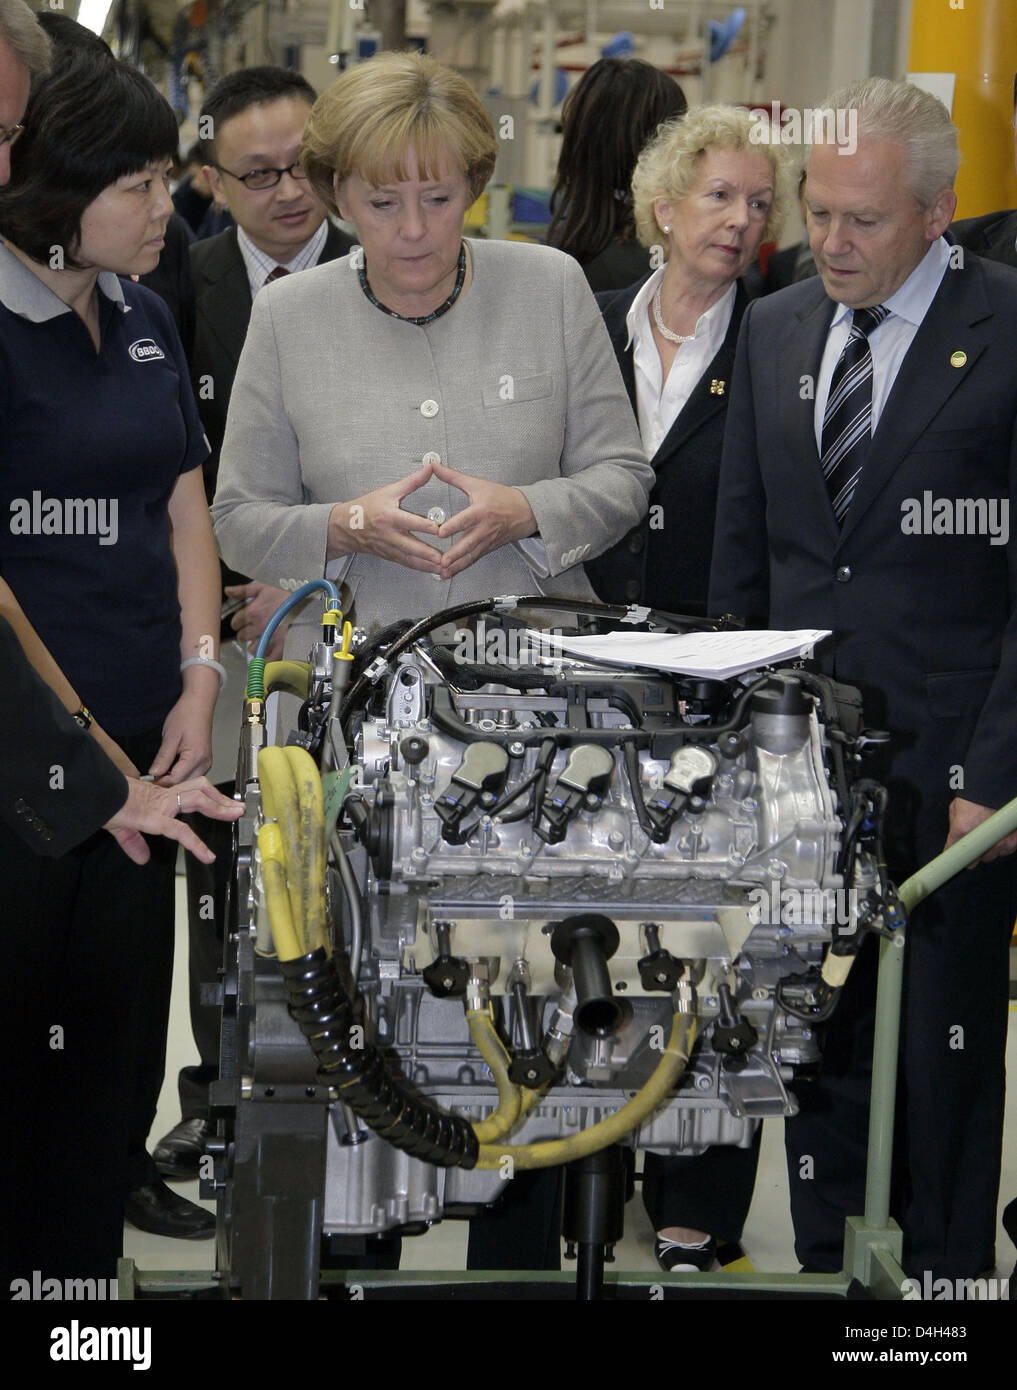 German Chancellor Angela Merkel stands next to Ruediger Grube (R), bord member of Daimler AG, during her visit at the Mercedes-Benz factory when vehicle no. 25,000 is being produced in Beijing, China, 23 October 2008. Merkel will hold bilateral talks and attend the Asia-Europe Meeting (ASEM) during her three-day stay at the chinese capital. Photo: Peer Grimm Stock Photo